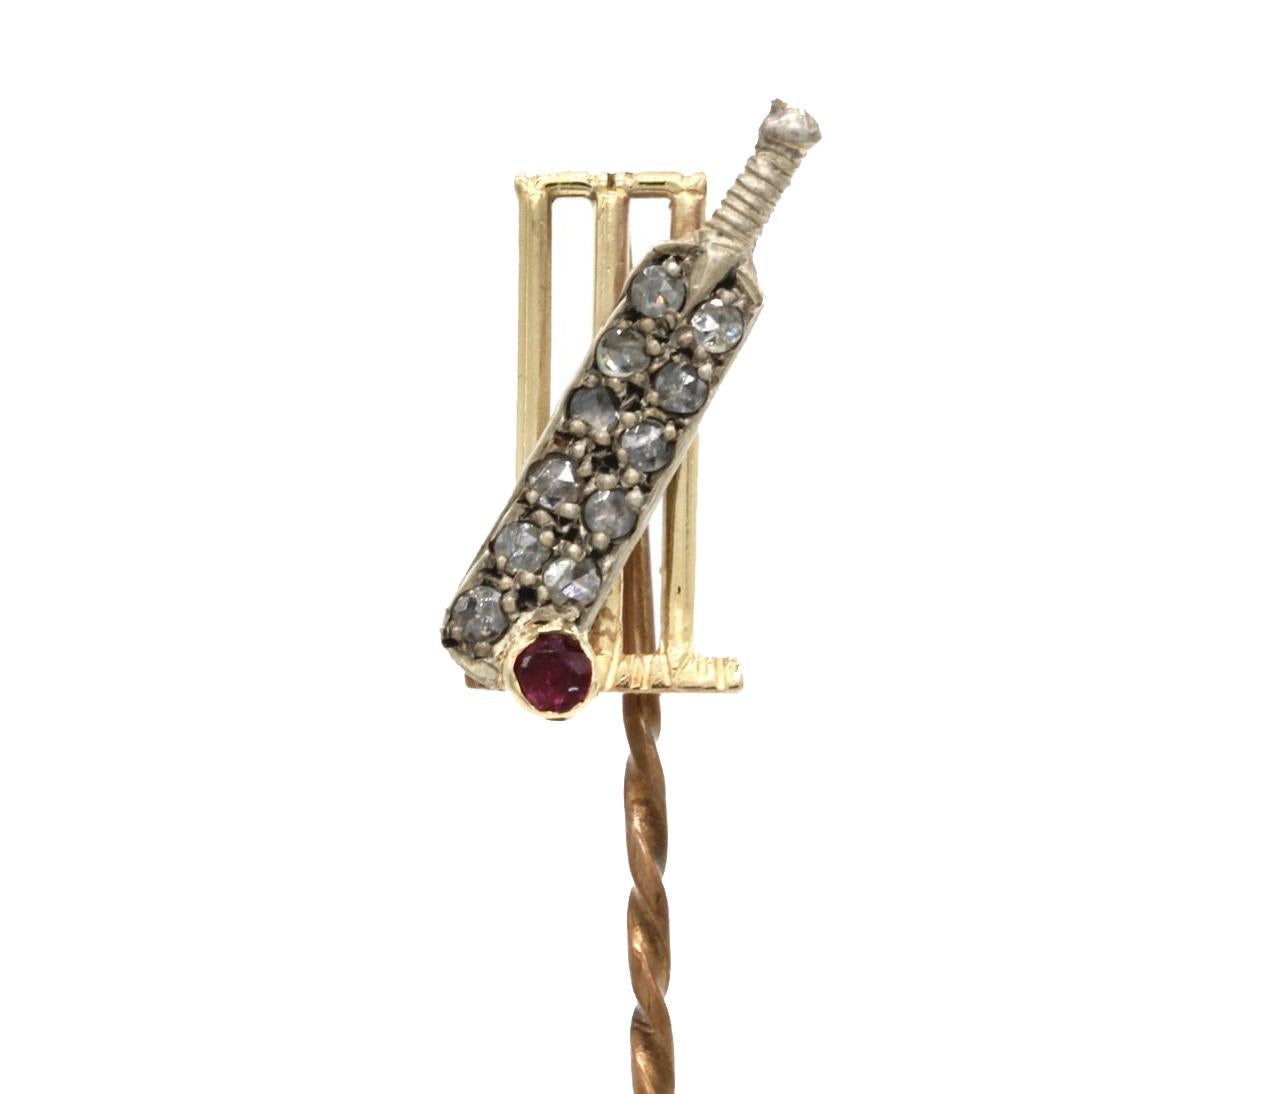 An 18 Kt yellow and white gold, diamond and ruby stick pin modeled as a cricket bat and ball in front of a set of stumps.
The white gold cricket bat set with eleven diamonds and the ball set with a ruby, all in front of a set of a set of yellow gold